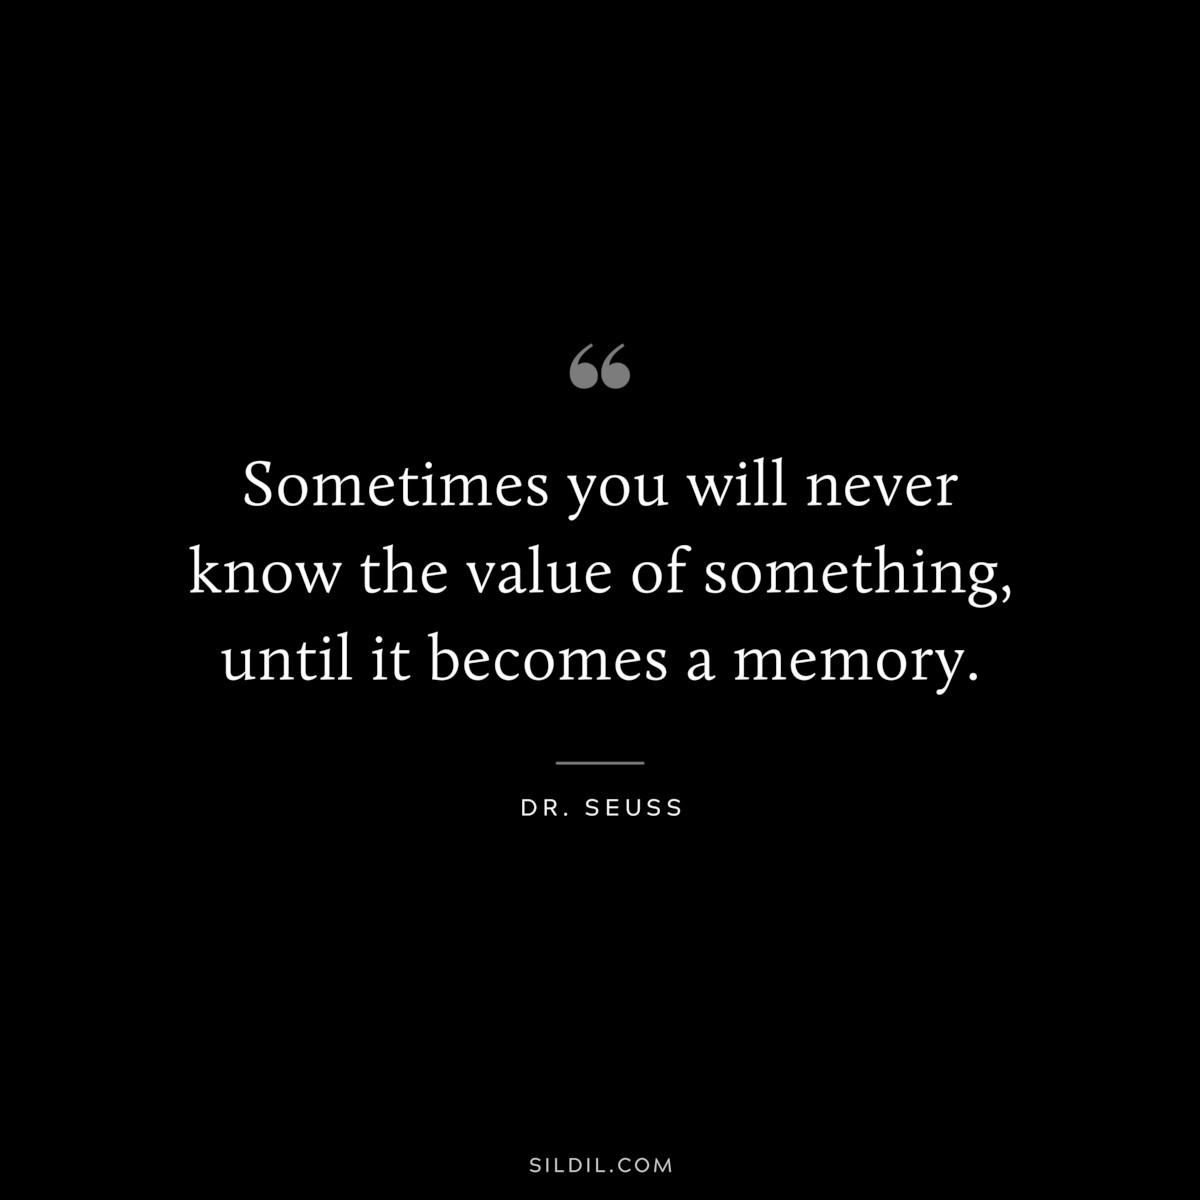 Sometimes you will never know the value of something, until it becomes a memory. ― Dr. Seuss